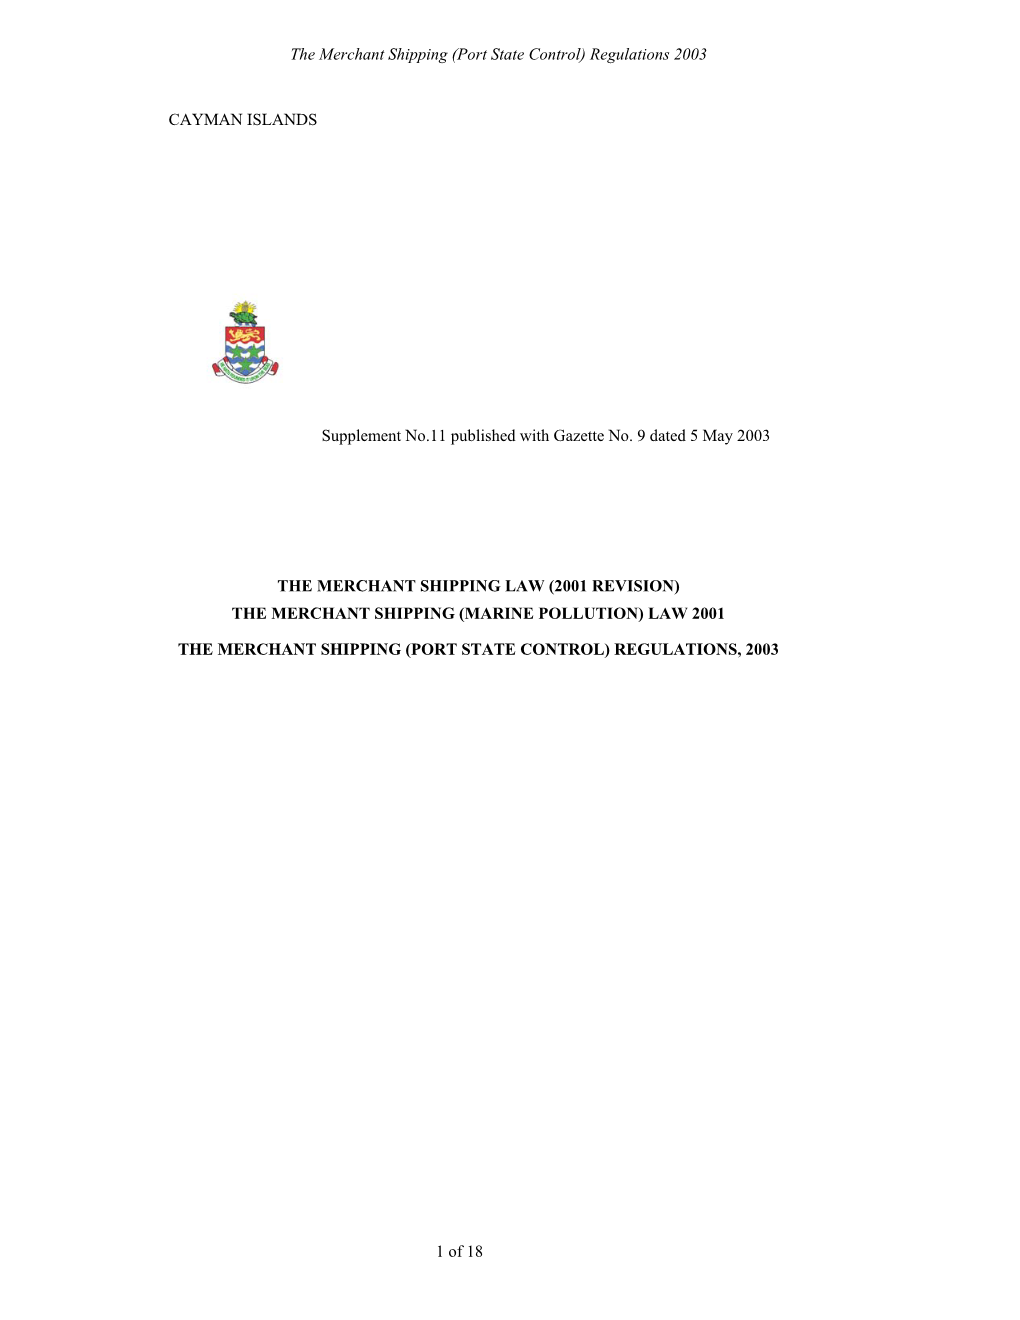 The Merchant Shipping (Port State Control) Regulations 2003